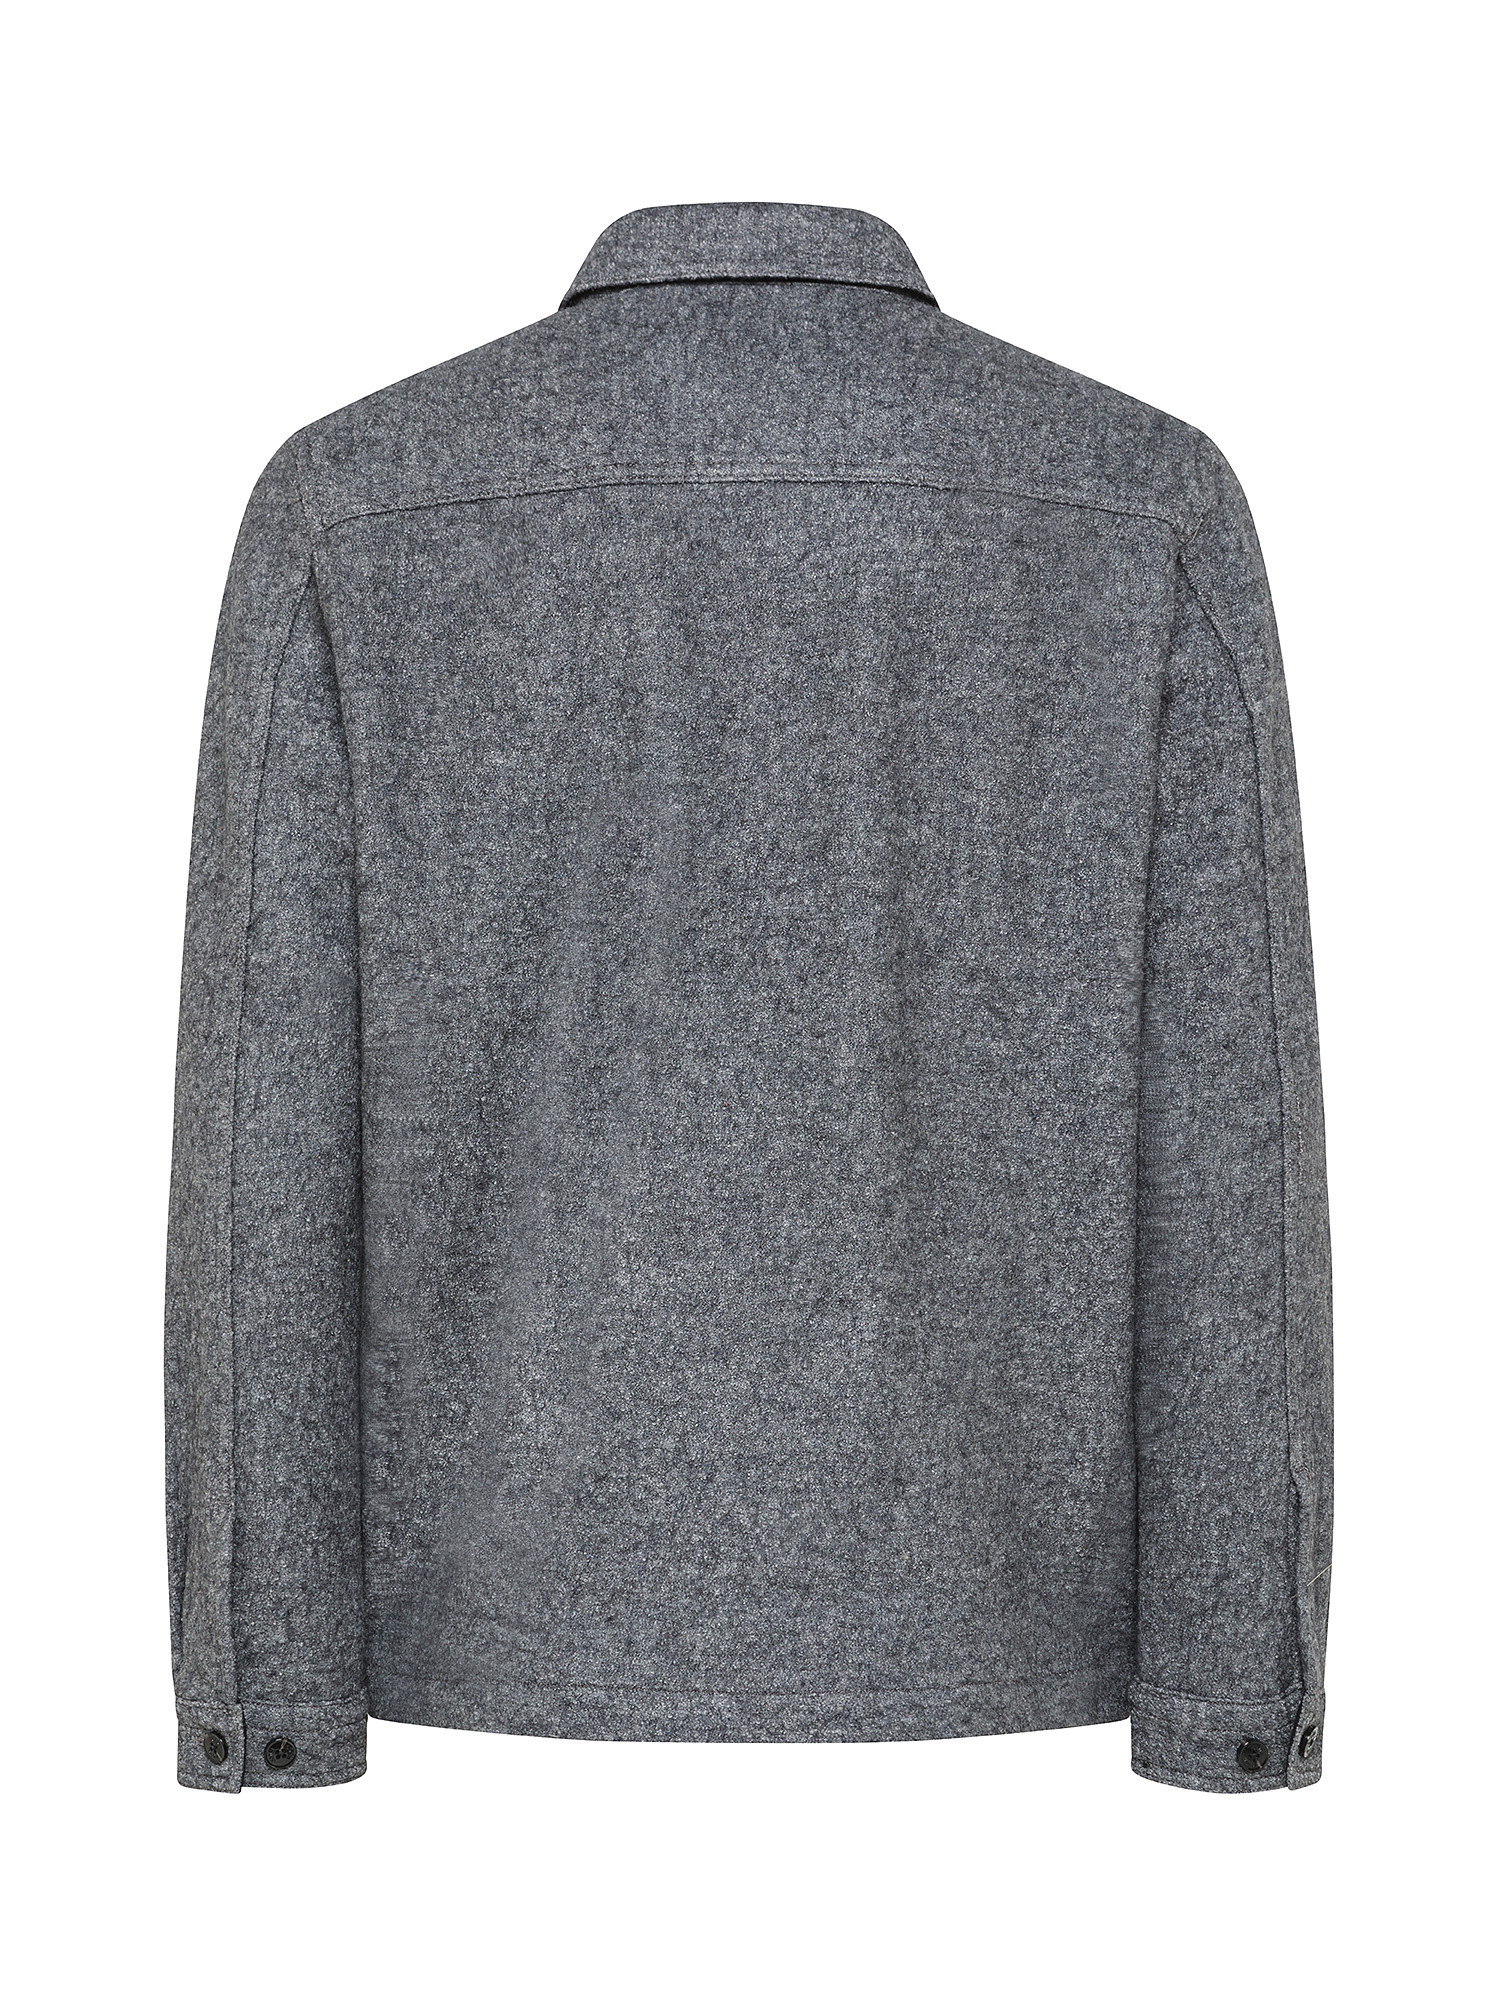 Hugo - Giacca a camicia oversize in misto lana, Grigio, large image number 1